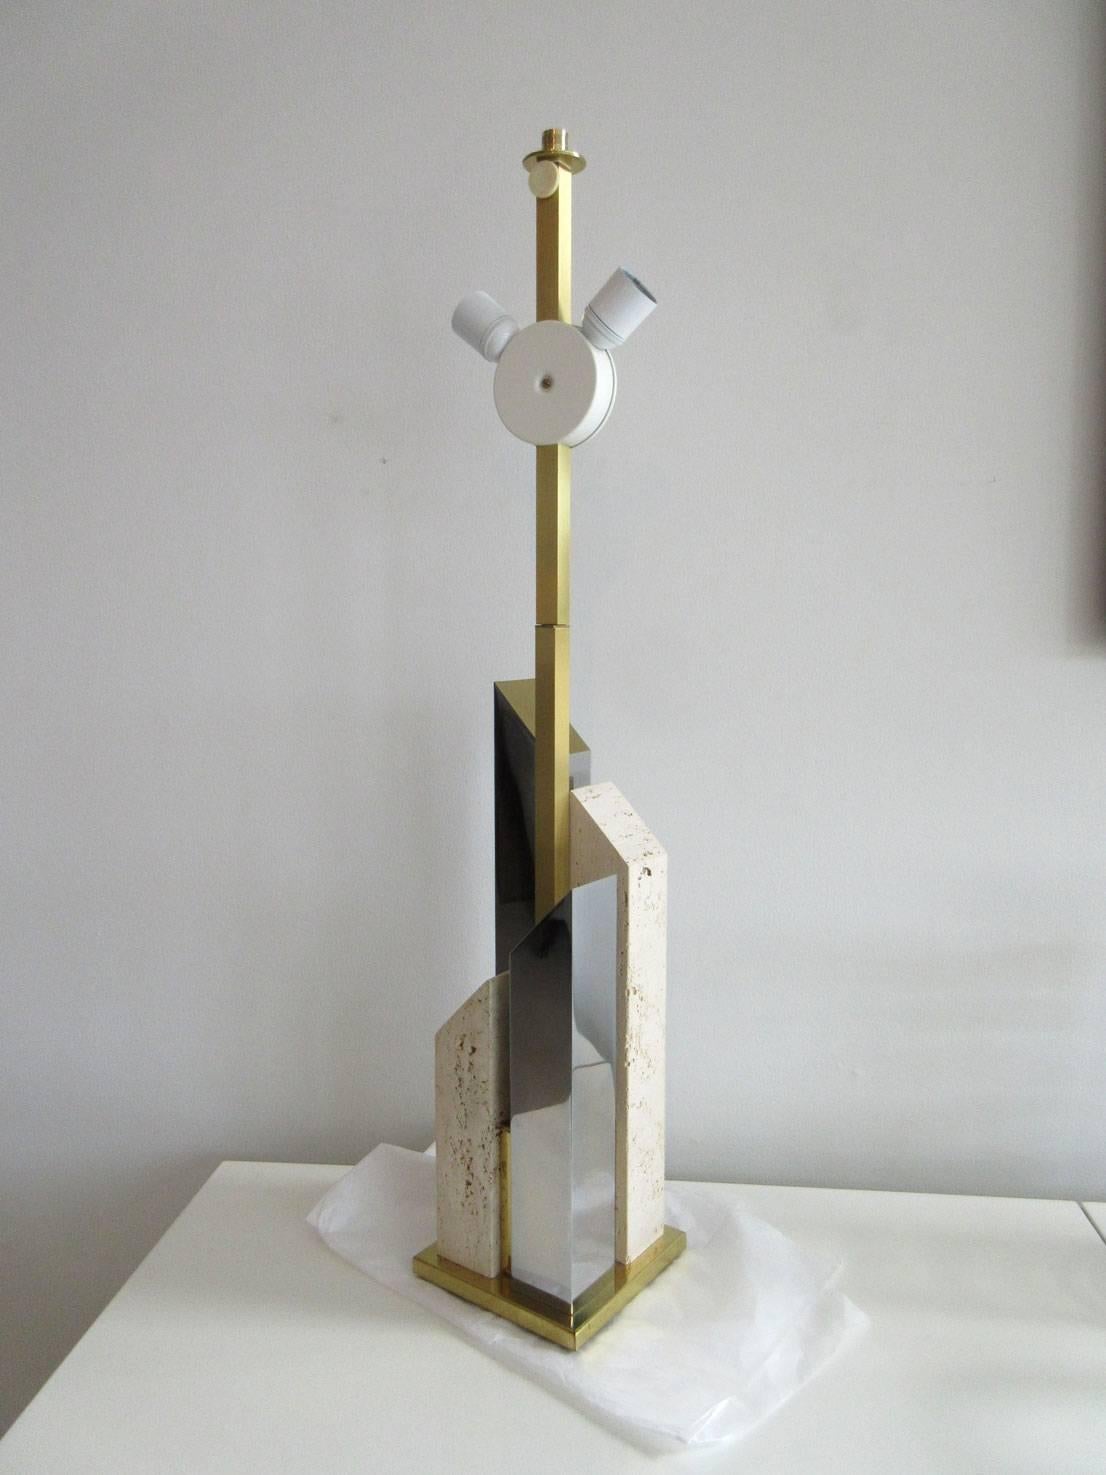 Vintage Gaetano Sciolari two-tone table lamp nickel-plate, brass complimented with stone. The Sciolari mark is at the top near the finial of the lamp.